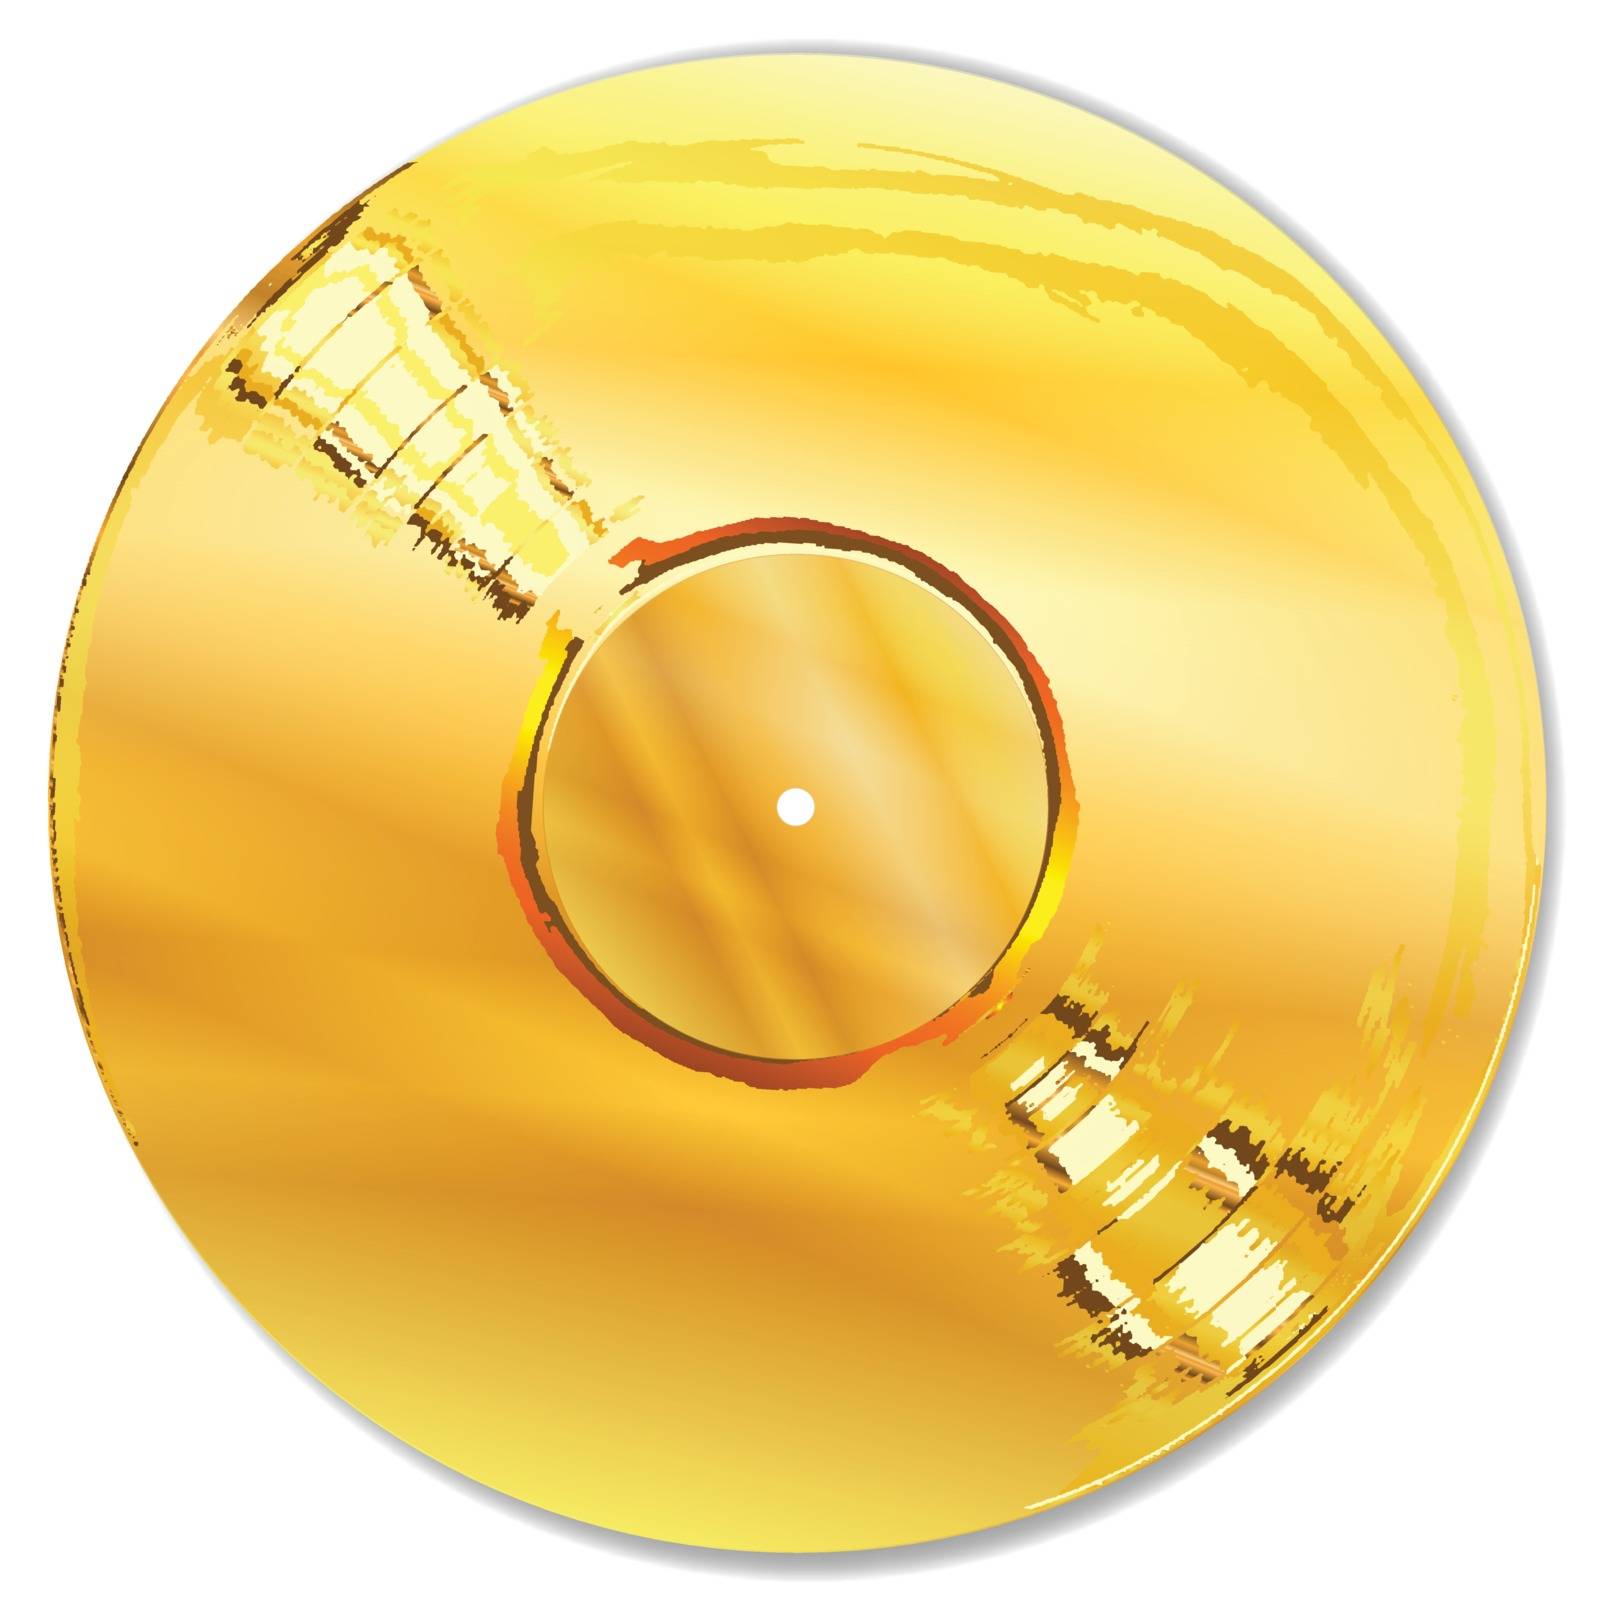 Solid Gold Record by Bigalbaloo